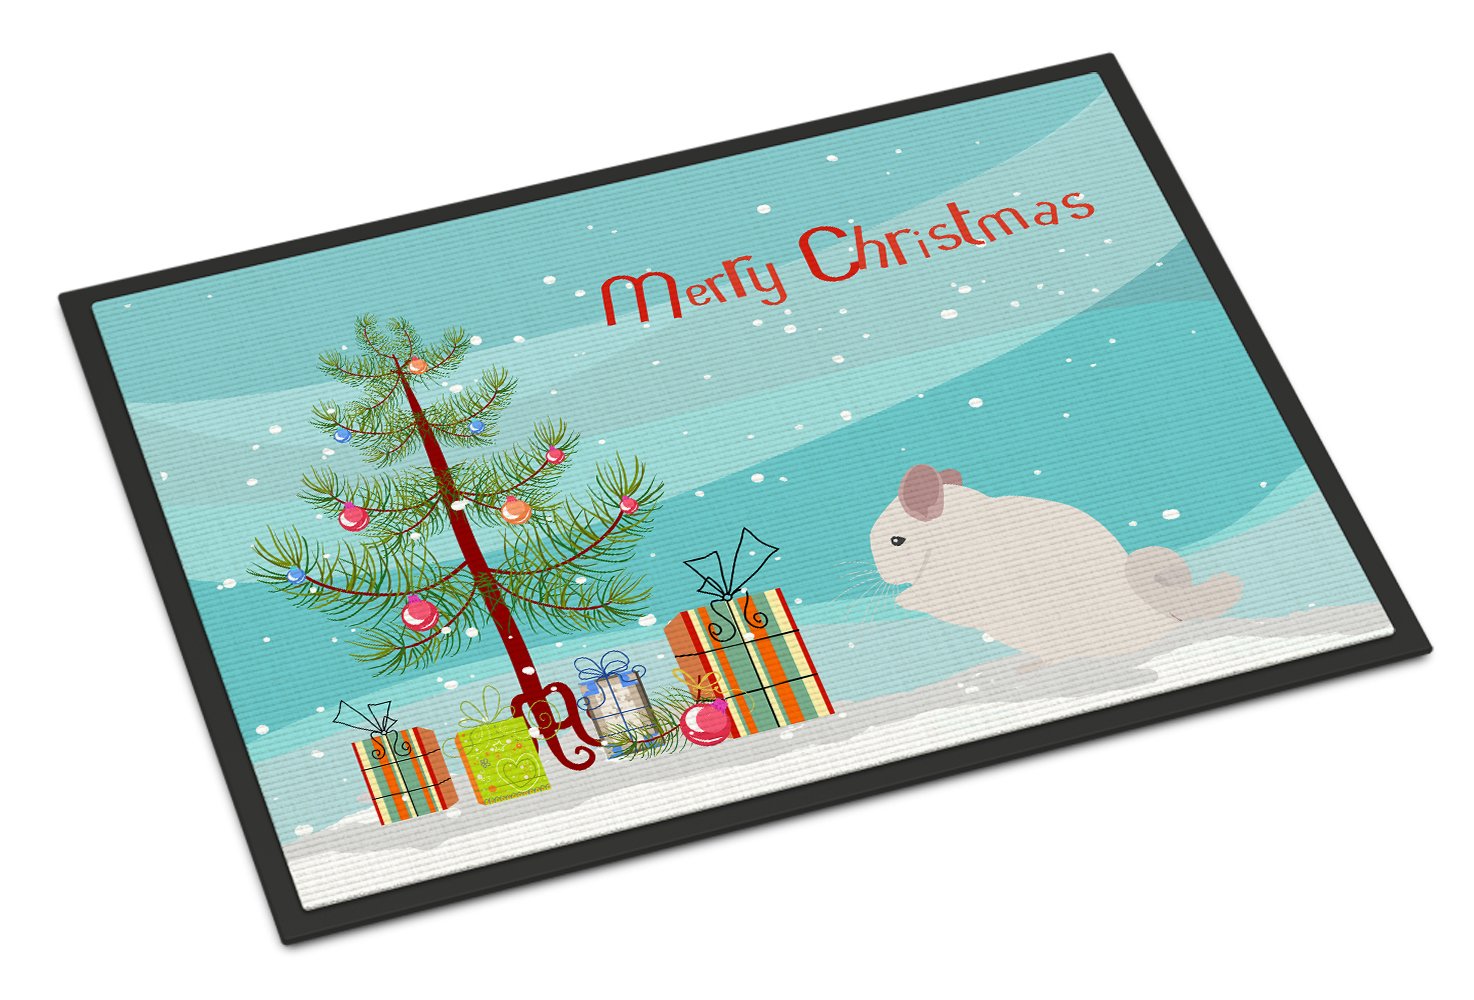 Pink and White Chinchilla Merry Christmas Indoor or Outdoor Mat 24x36 CK4436JMAT by Caroline's Treasures